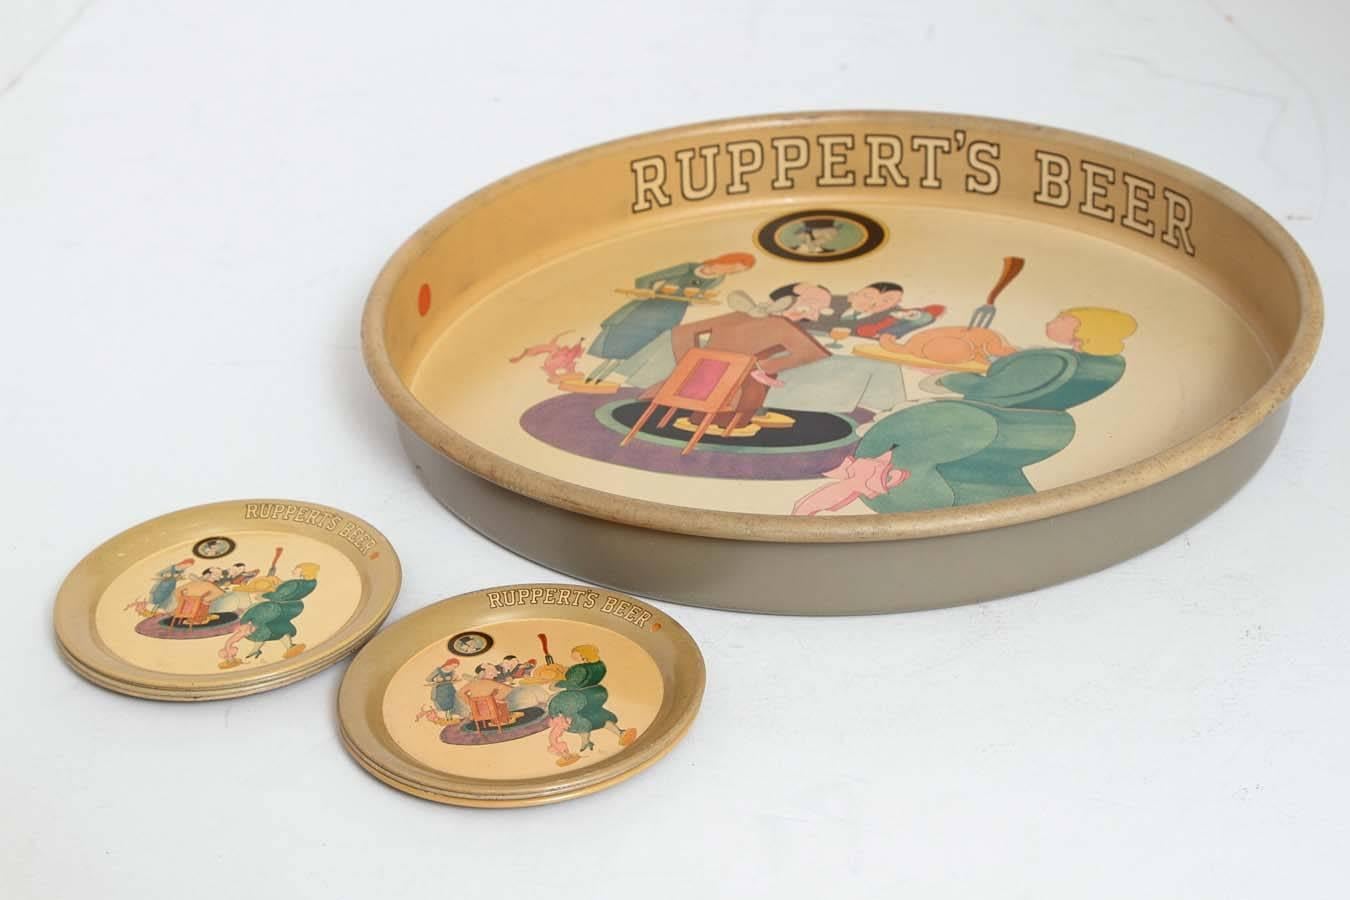 Cubist Jazz Age Cocktail Tray or Tip Coaster Collection Ruppert's Beer In Good Condition For Sale In Dallas, TX